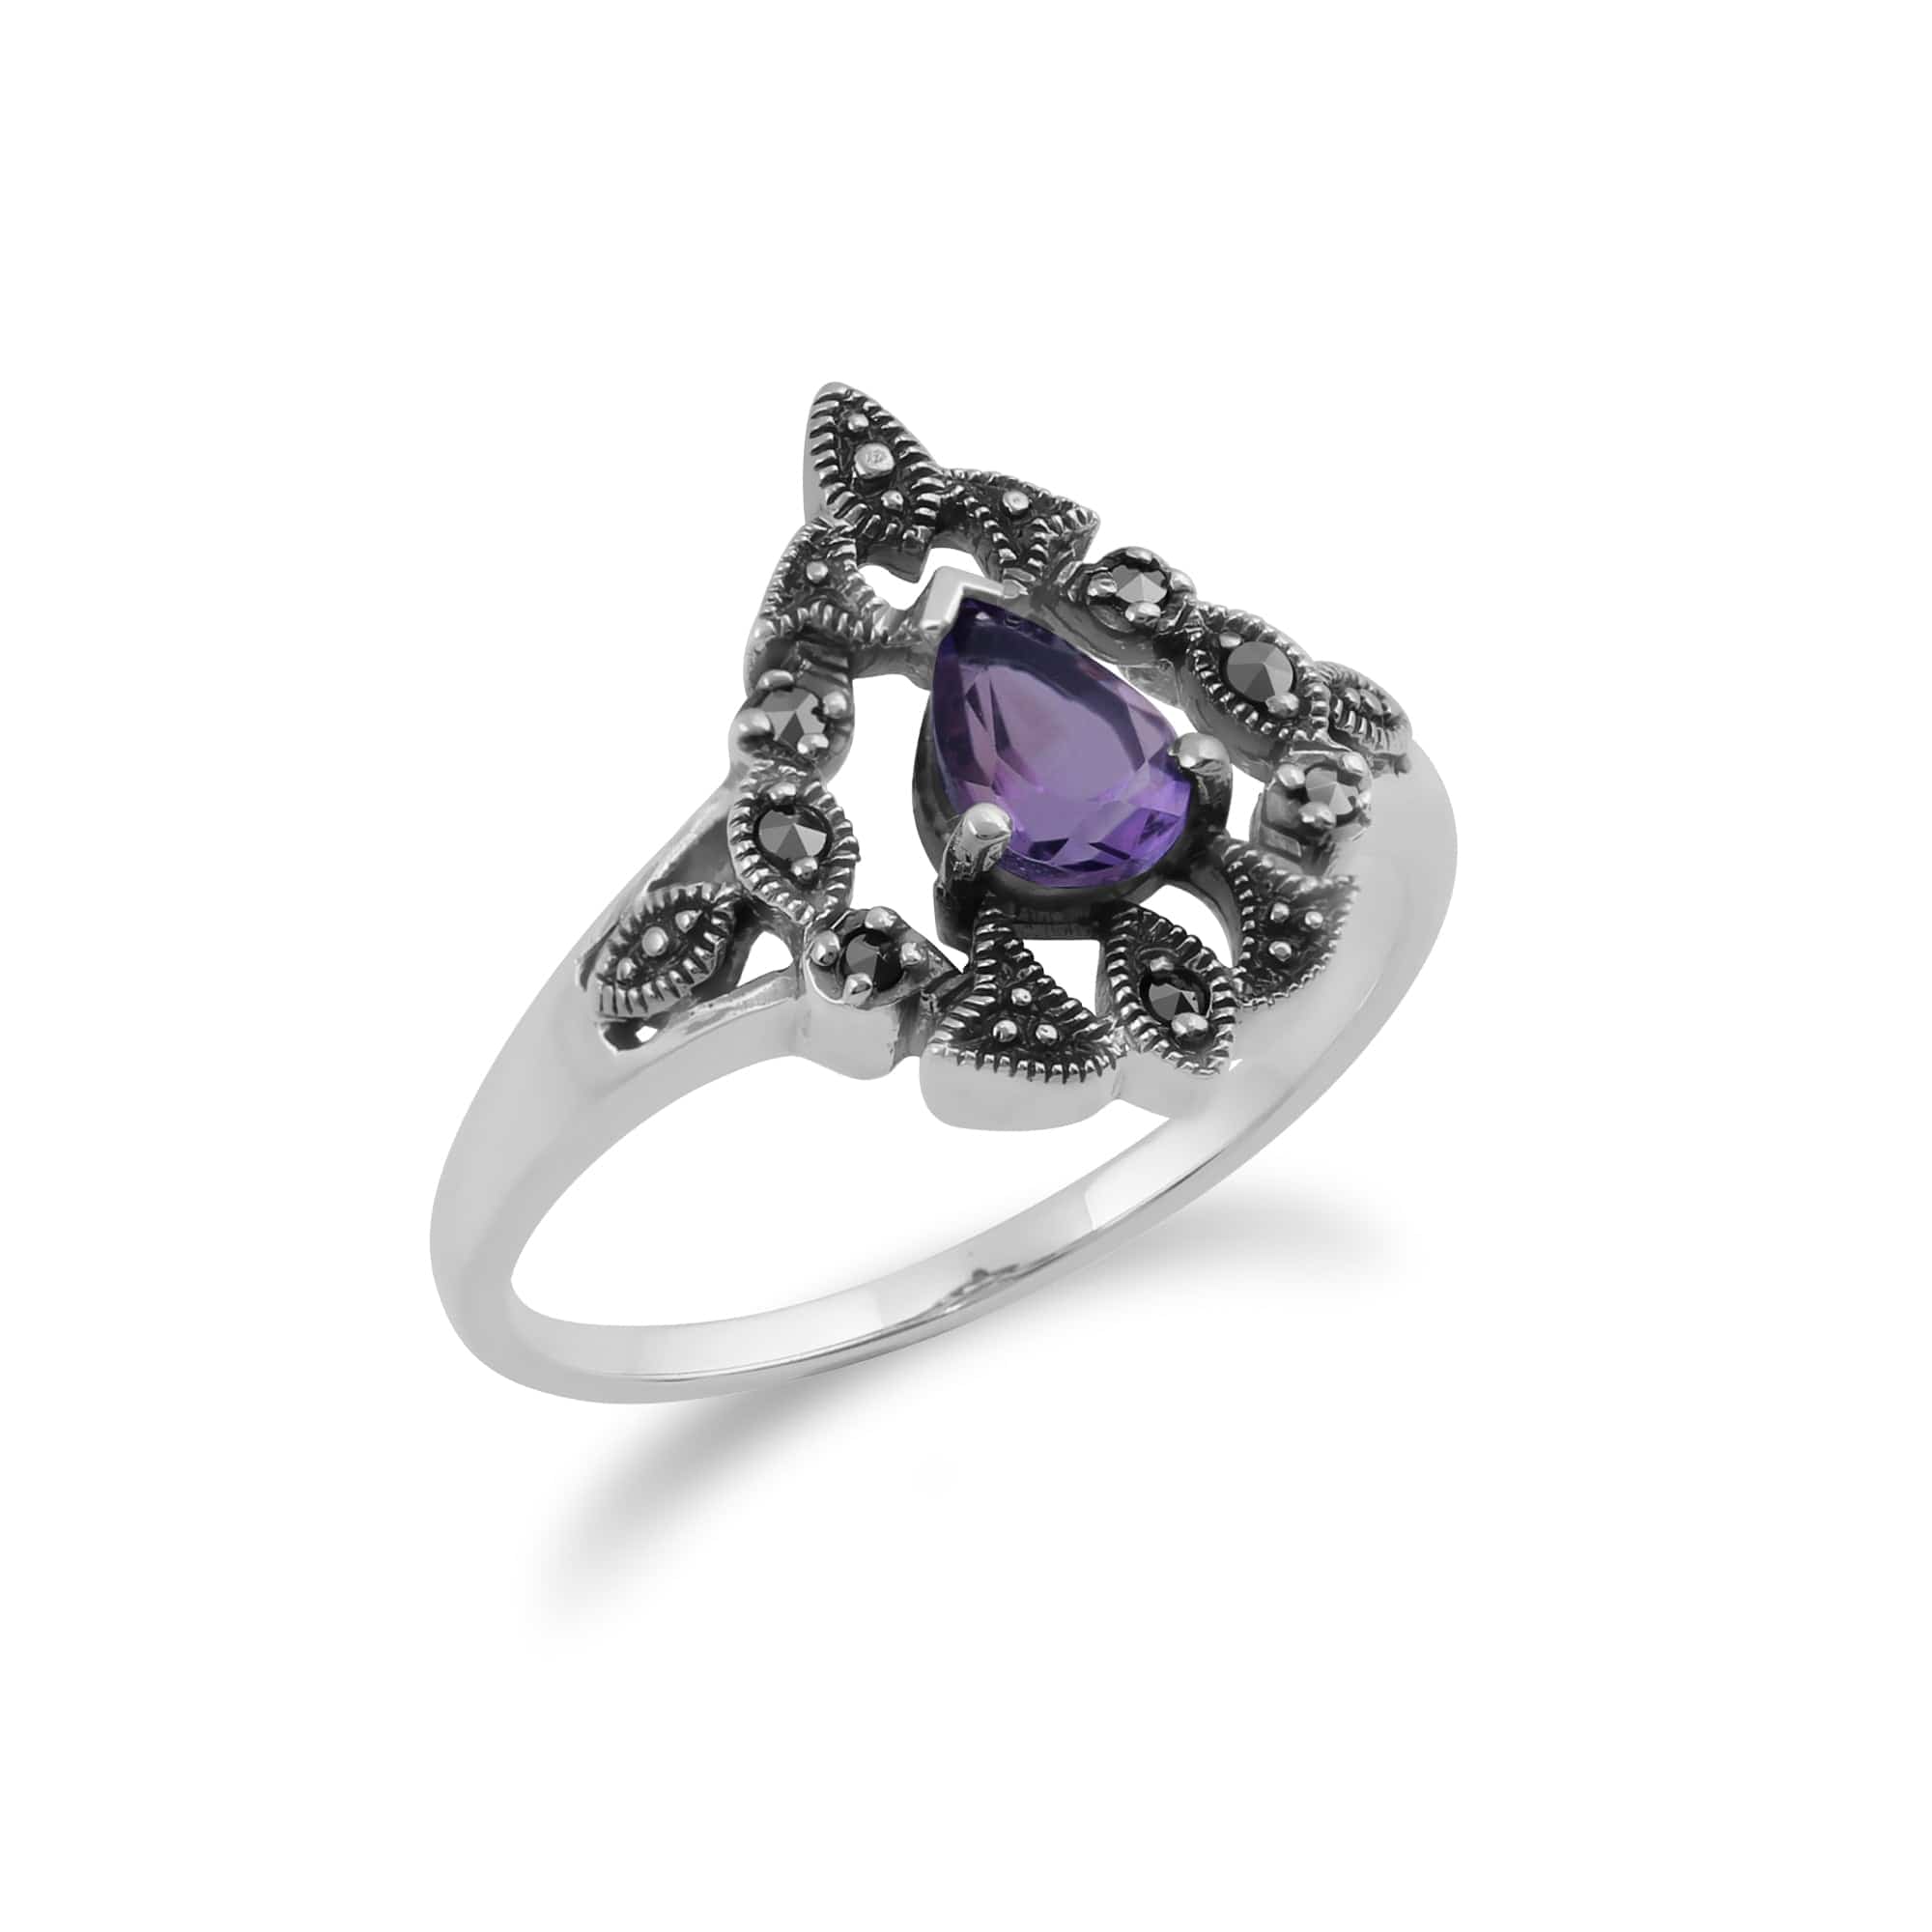 214R507802925 Art Nouveau Style Pear Amethyst & Marcasite Statement Ring in 925 Sterling Silver 2